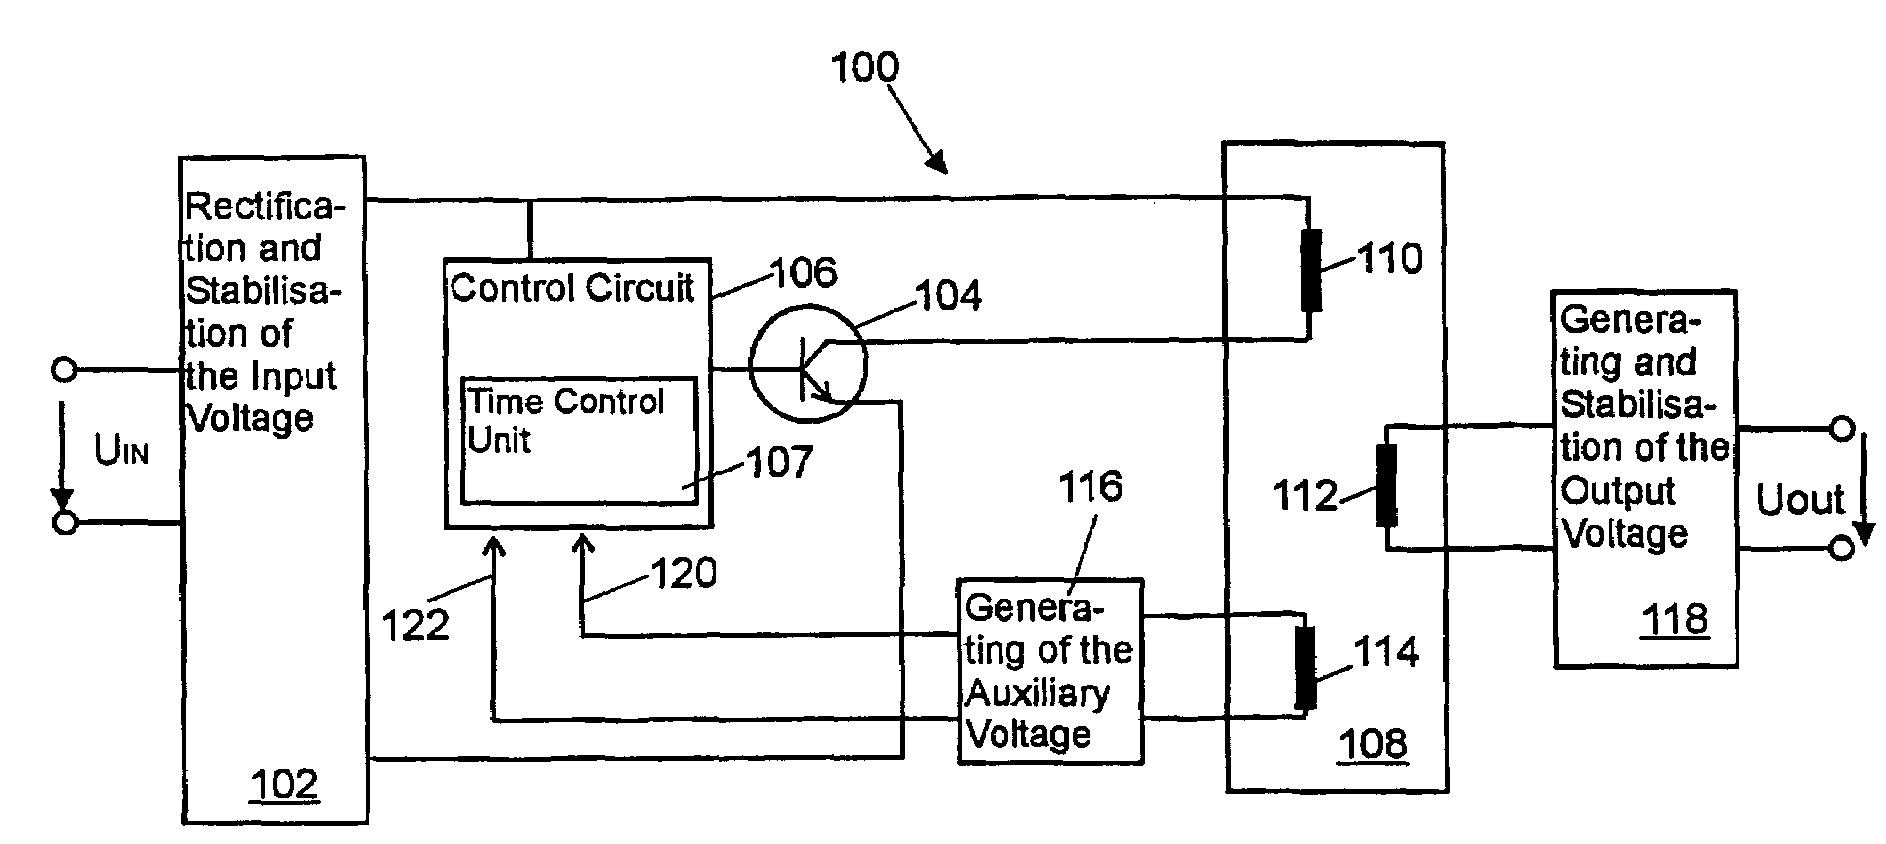 Simple switched-mode power supply with current and voltage limitation